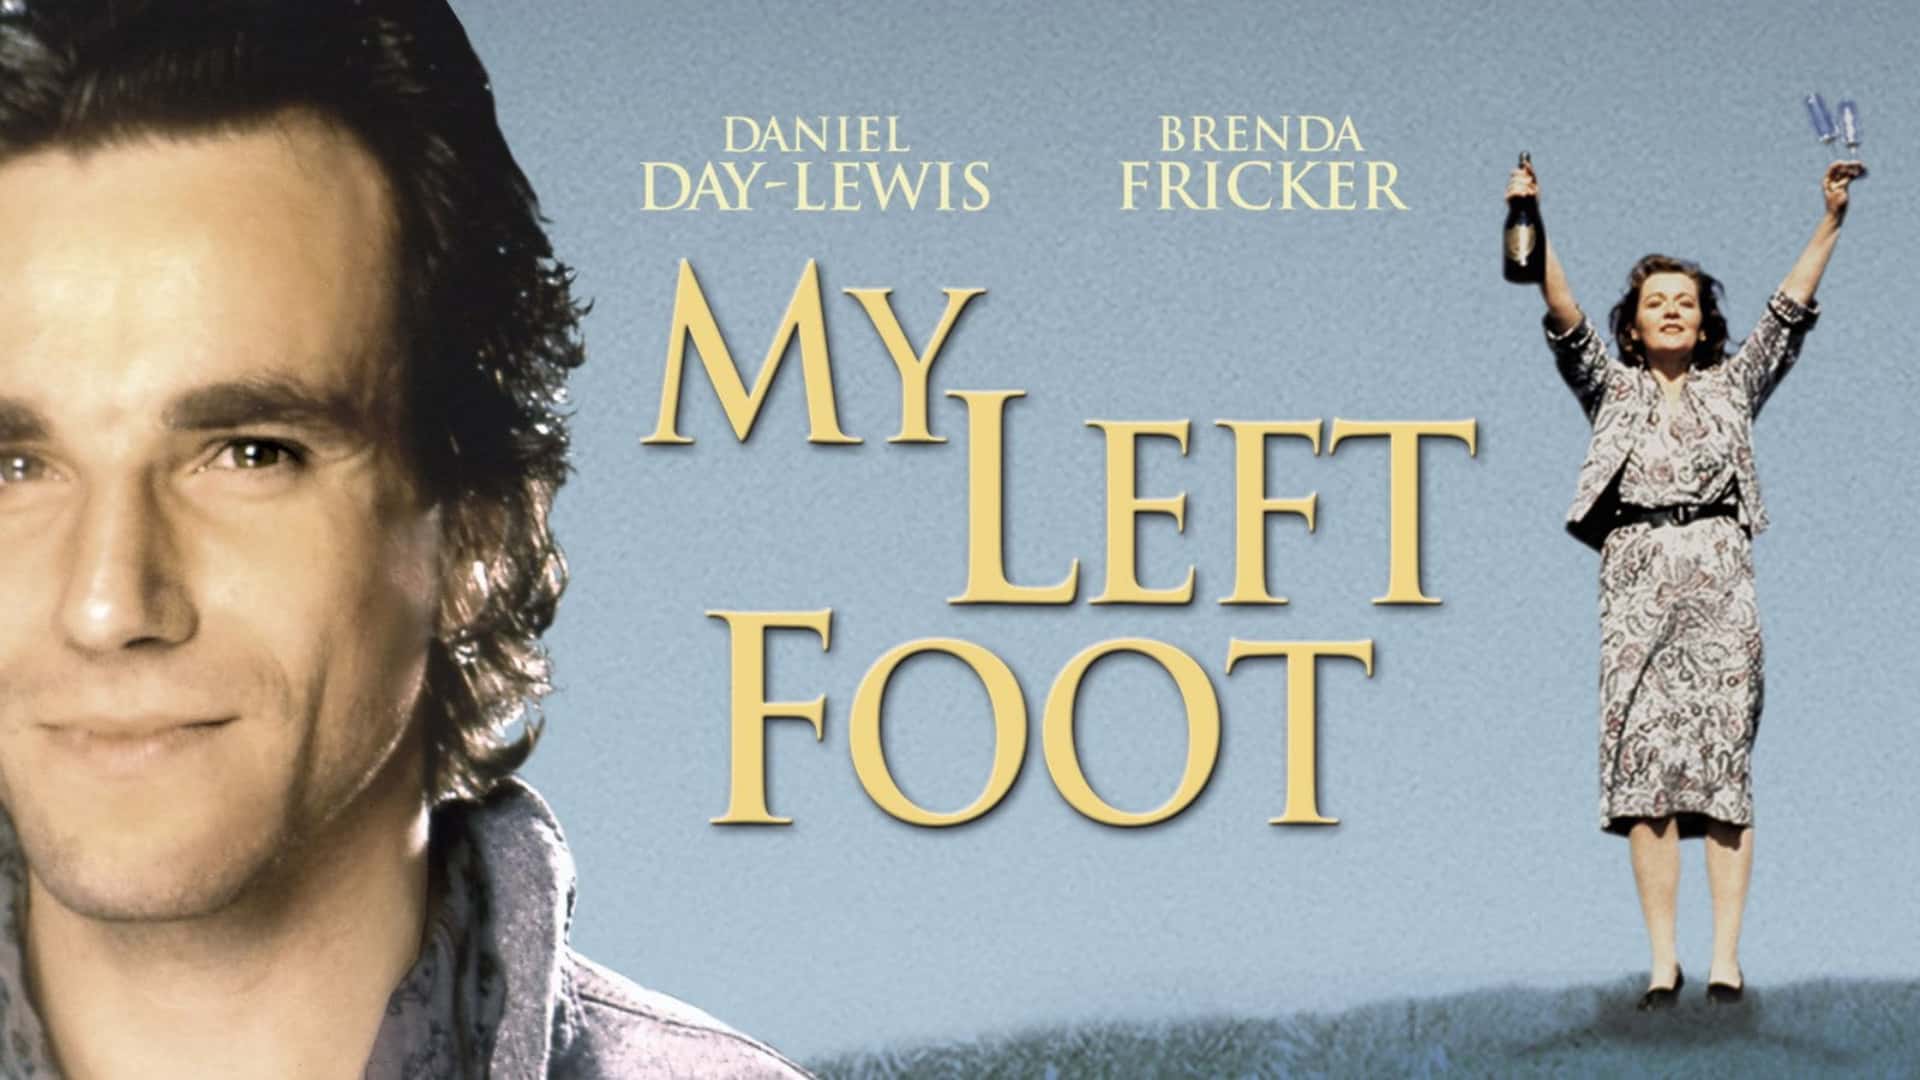 My Left Foot: The Story of Christy Brown, a biographical comedy-drama film directed by Jim Sheridan.Daniel Day-Lewis as Christy Brown Hugh O'Conor as Young Christy Brown